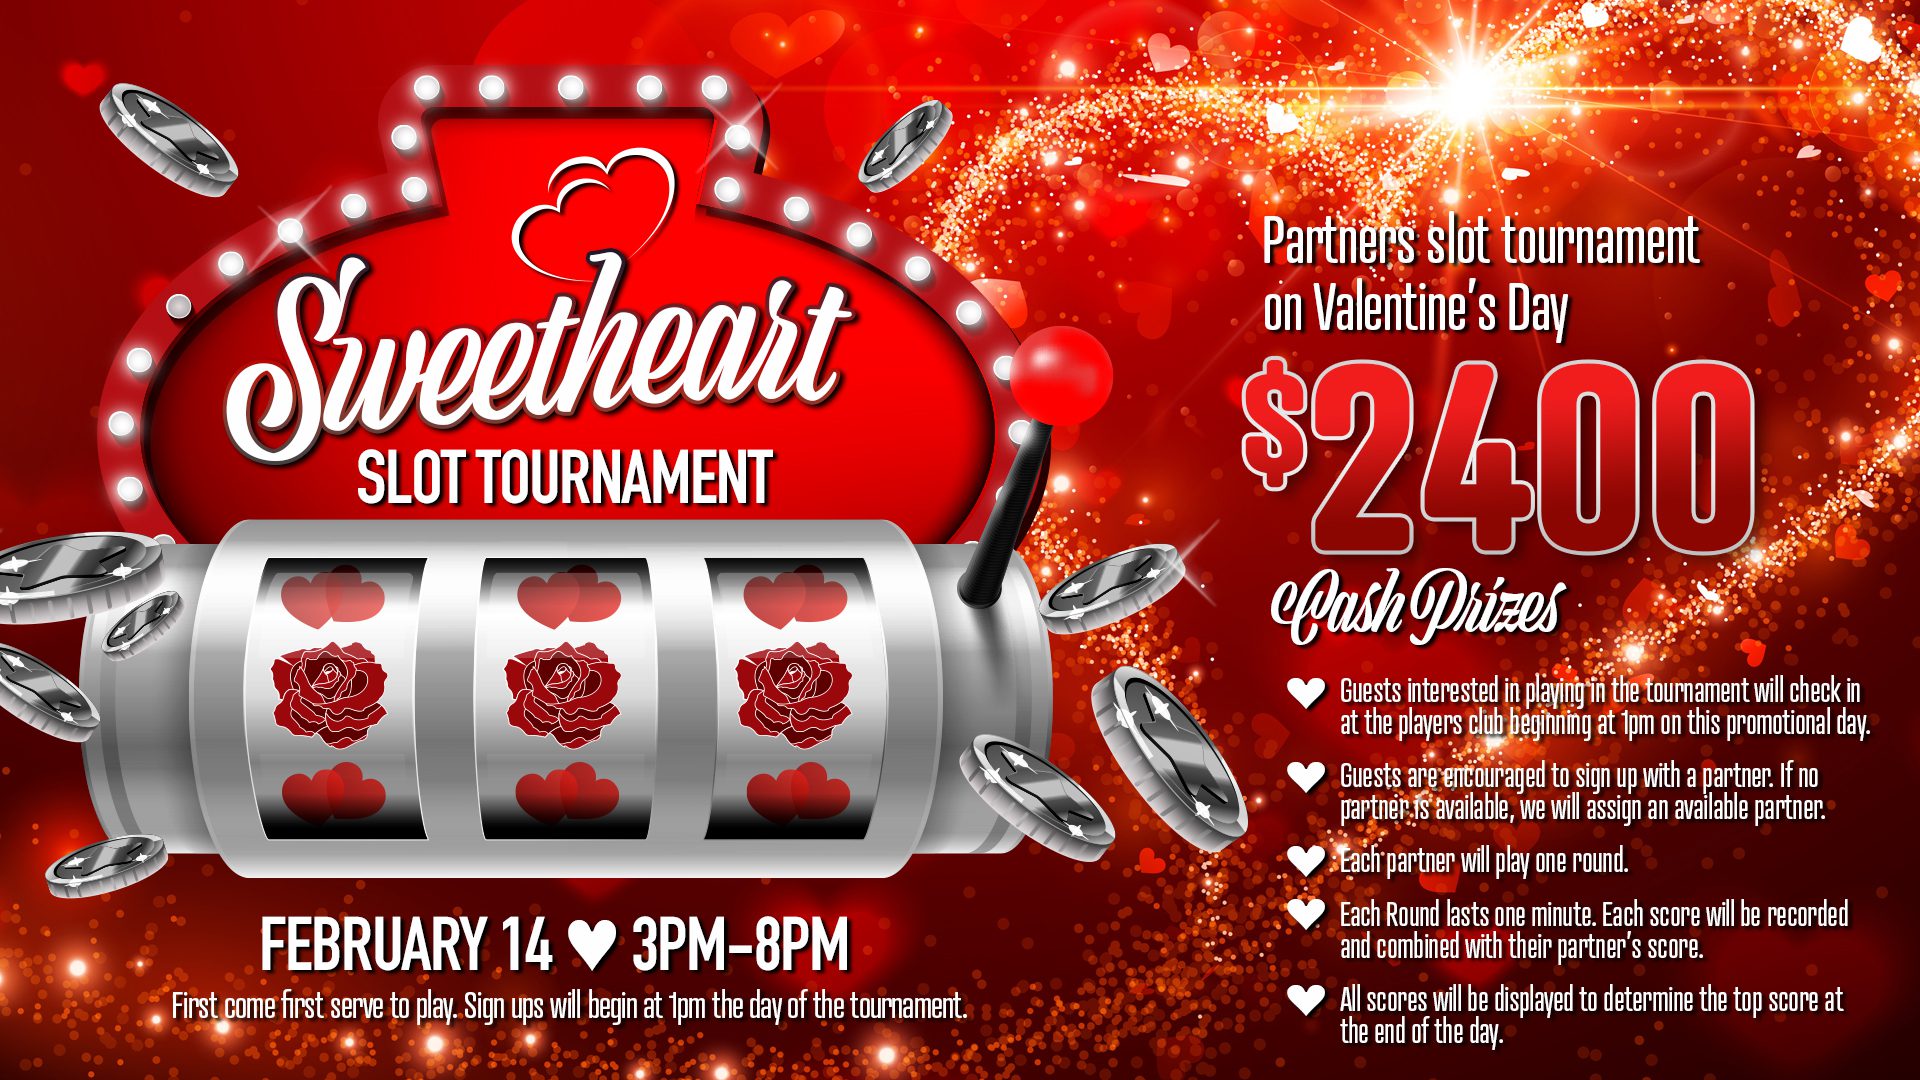 Valentine's slot tournament advertisement with vivid red background, floating hearts, and a slot machine displaying roses.